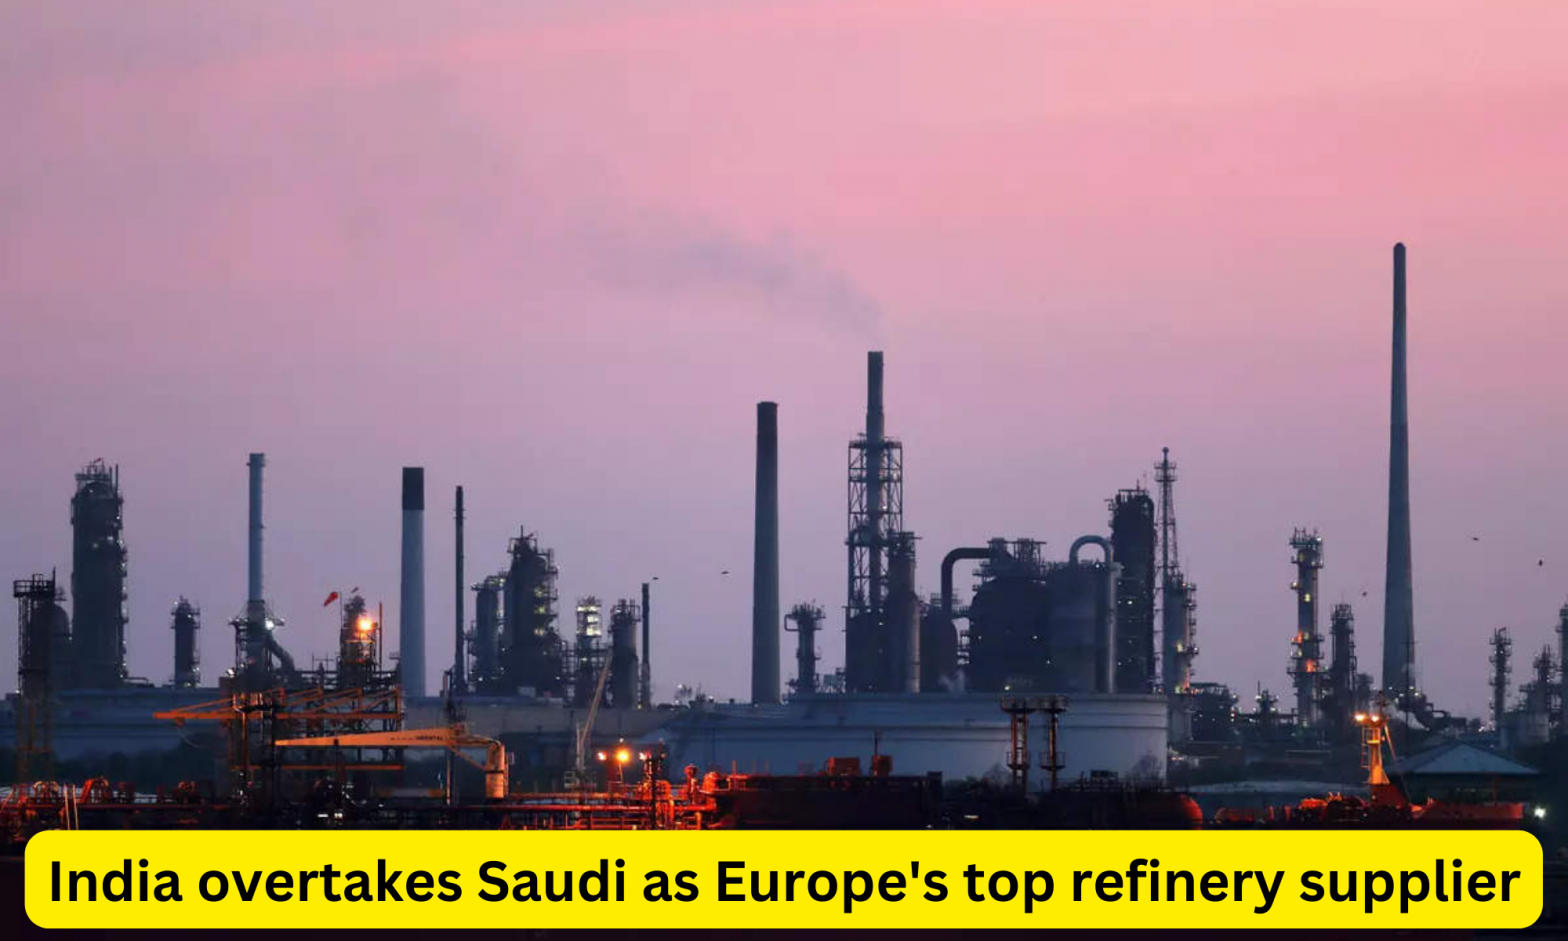 India overtakes Saudi as Europe's top refinery supplier